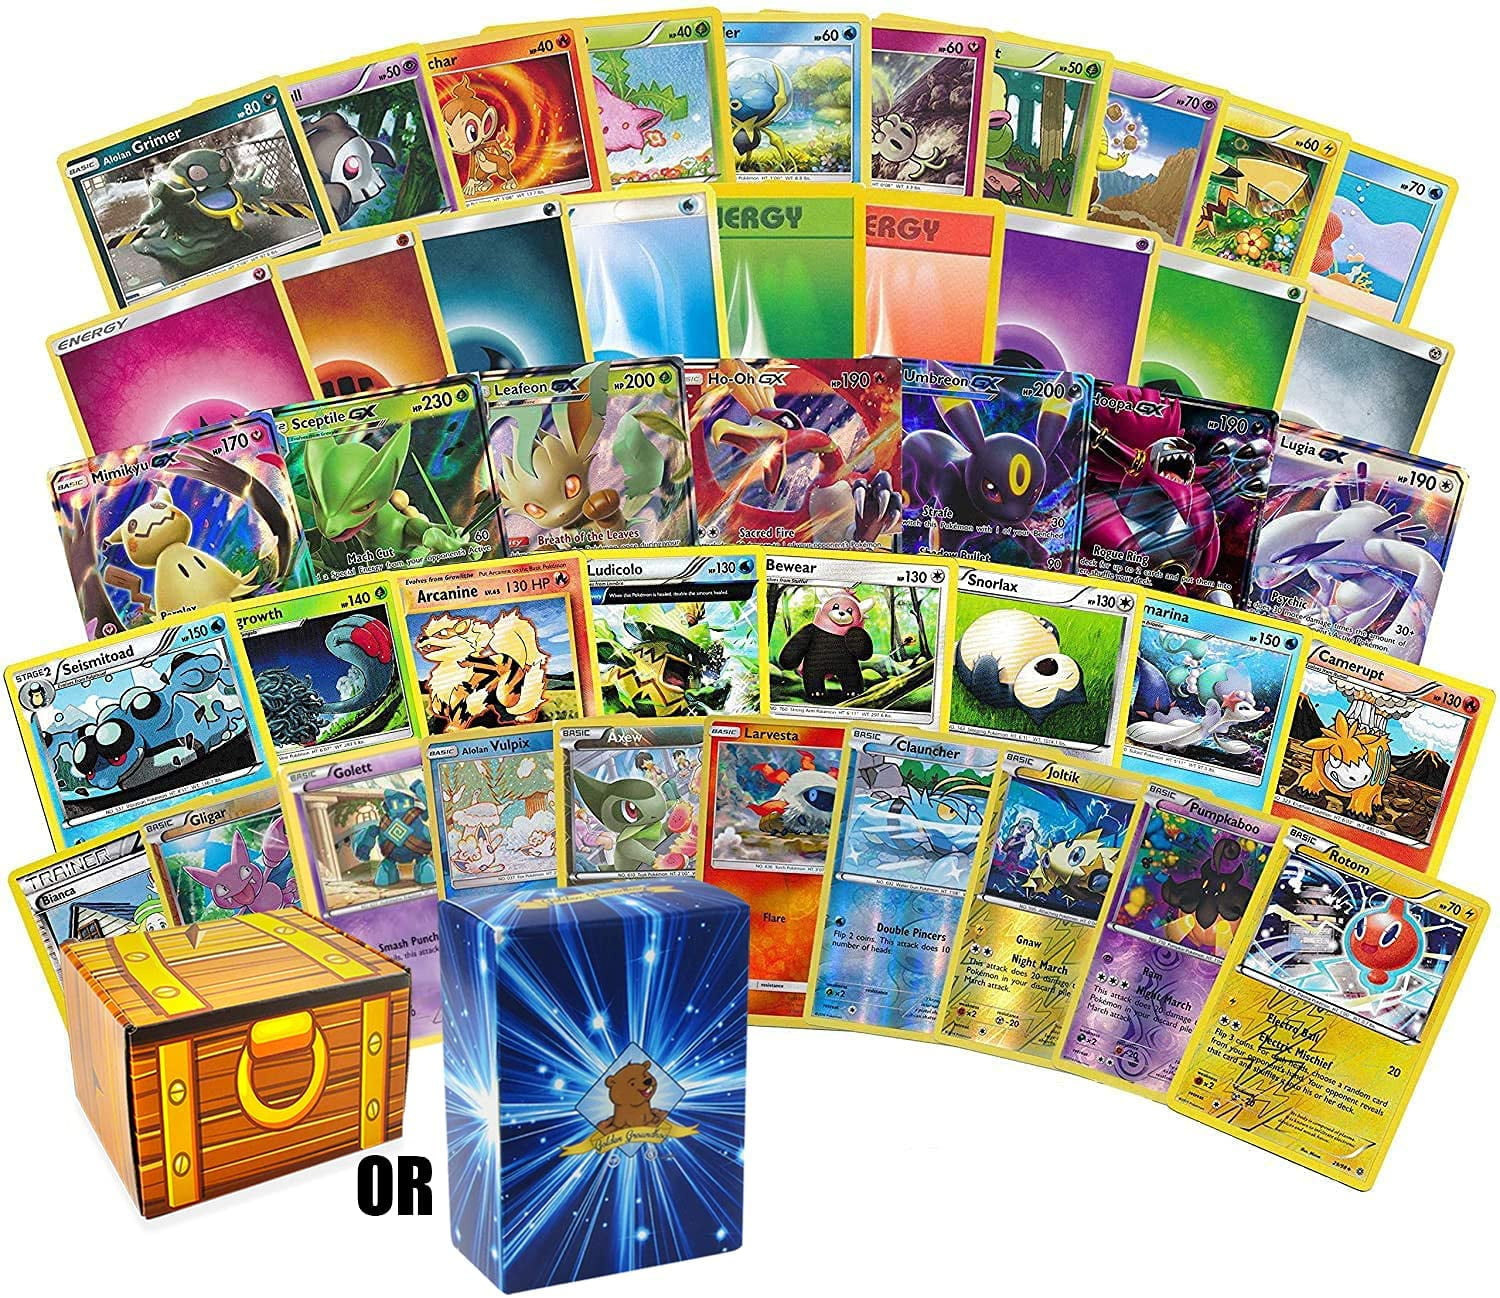 Details about   Pokemon TCG 200 Near Mint Card Lot Common/Uncommon/Rare with ULTRA RARE EX/GX/V 